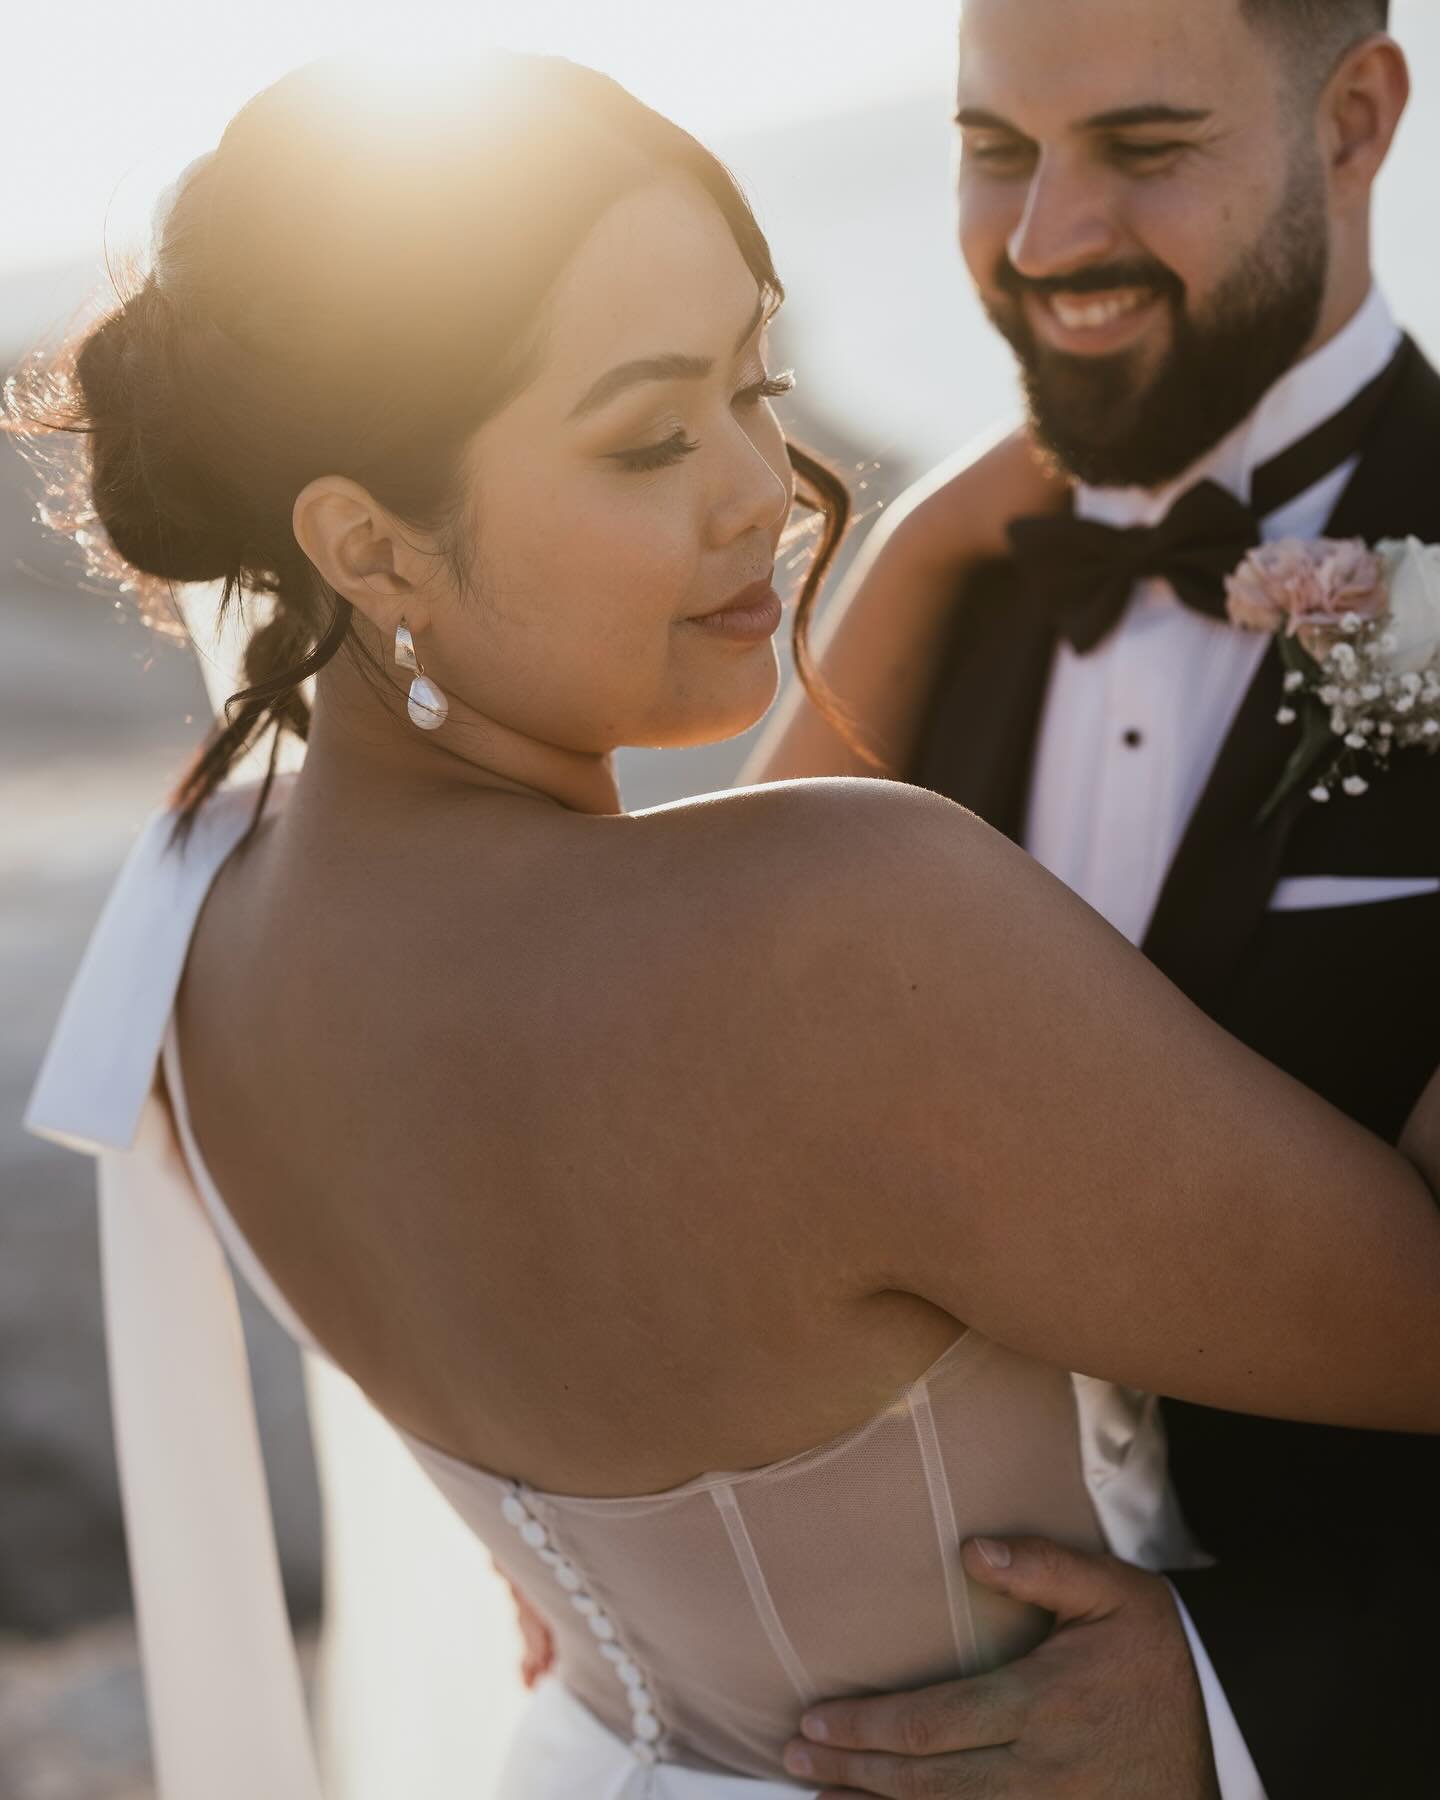 D E B B I E +  T O B I A S

Debbie and Tobias&rsquo; wedding was a beautiful celebration of love, unity, and joy. From the heartfelt vows they exchanged to the radiant smiles on their faces, every moment was filled with genuine happiness and love. Th